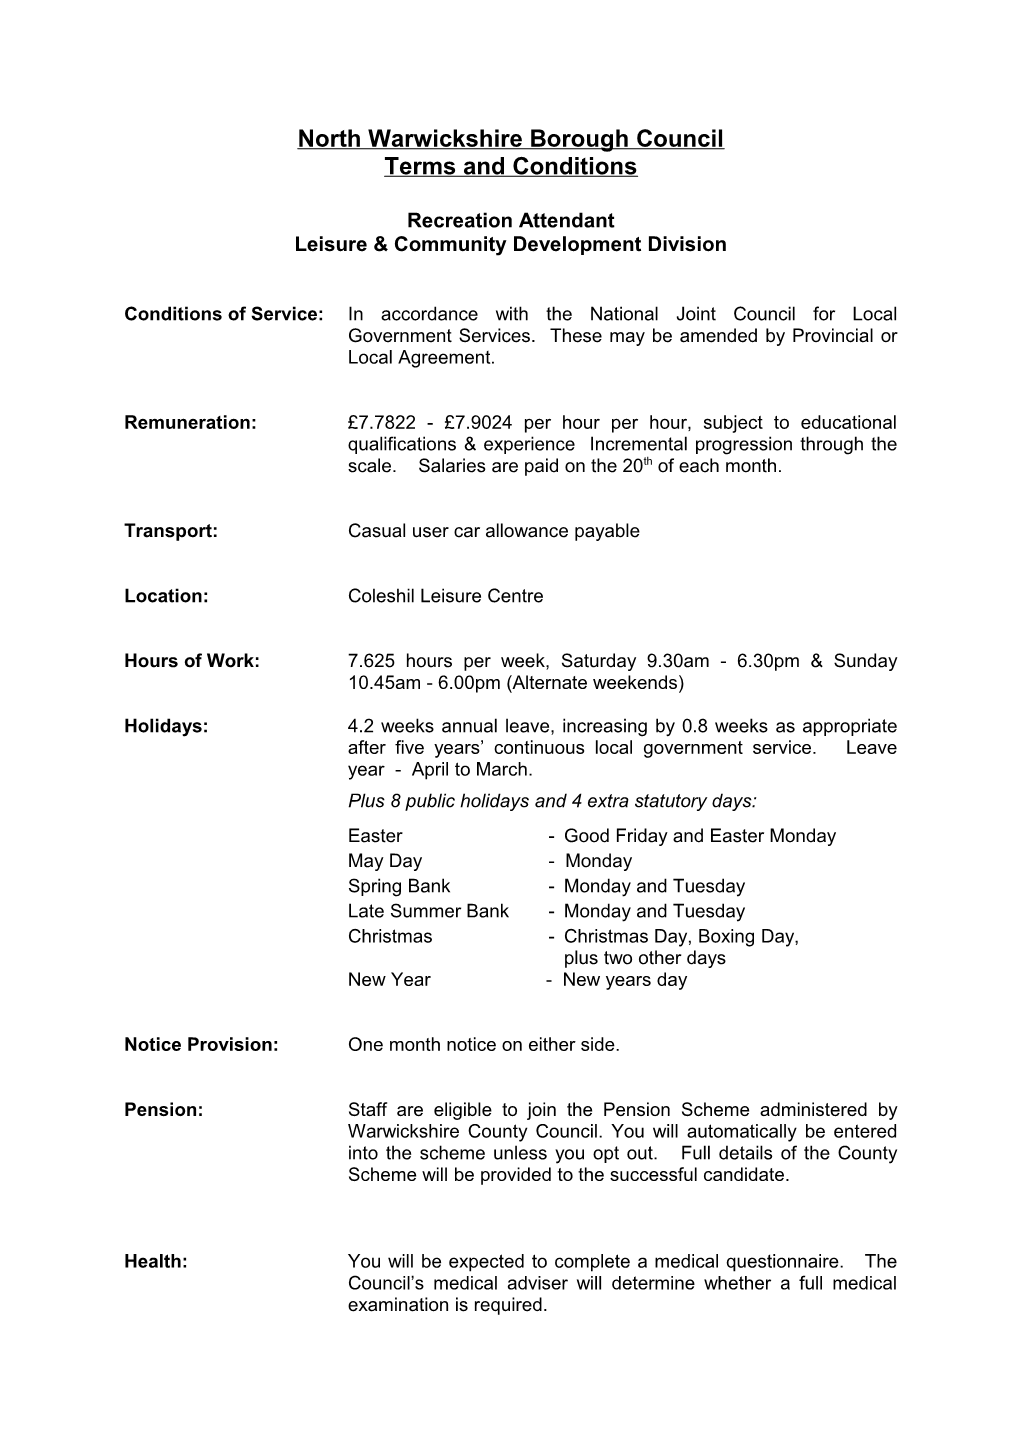 Terms and Conditions - Principal Building Control Officer